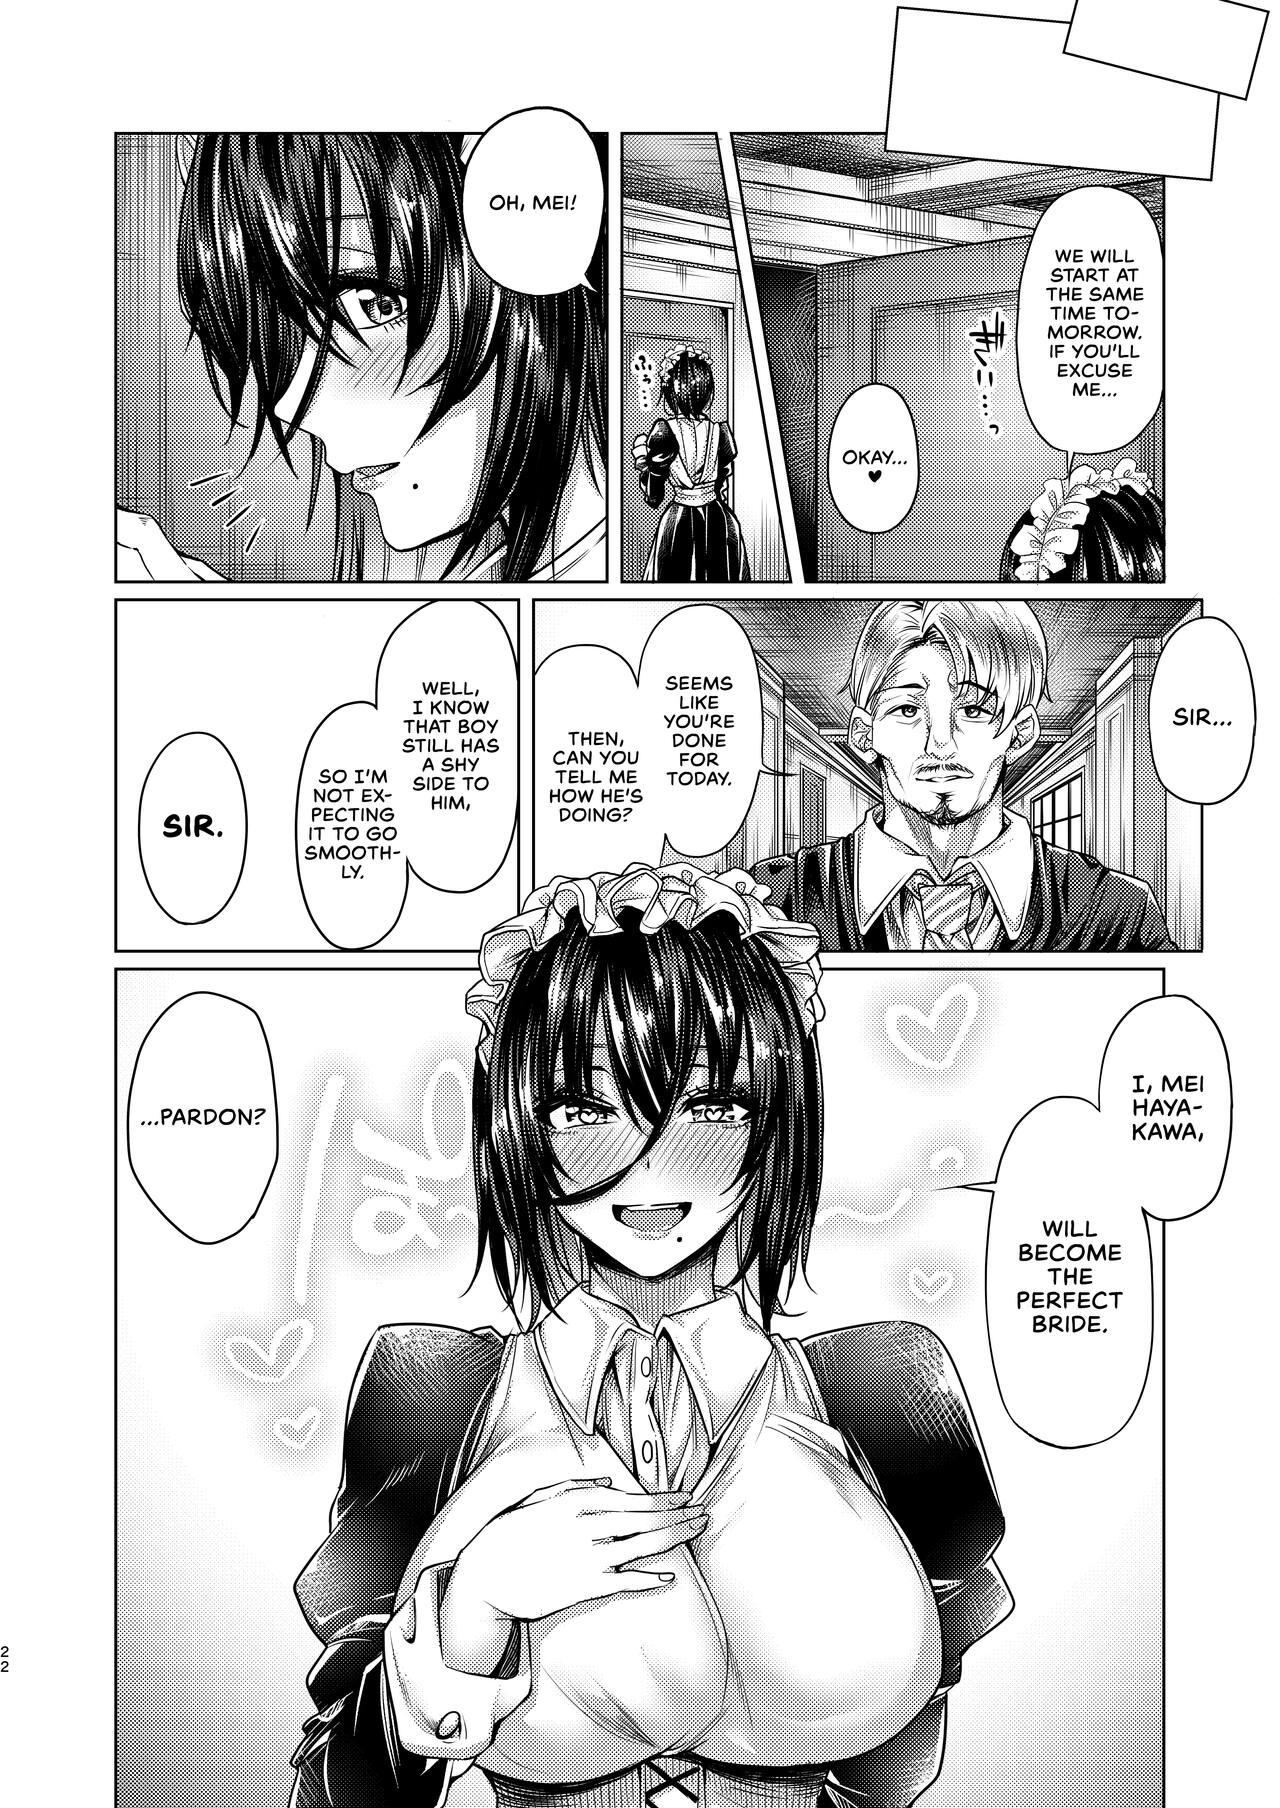 Shota to Maid. - A young boy and his maid 21